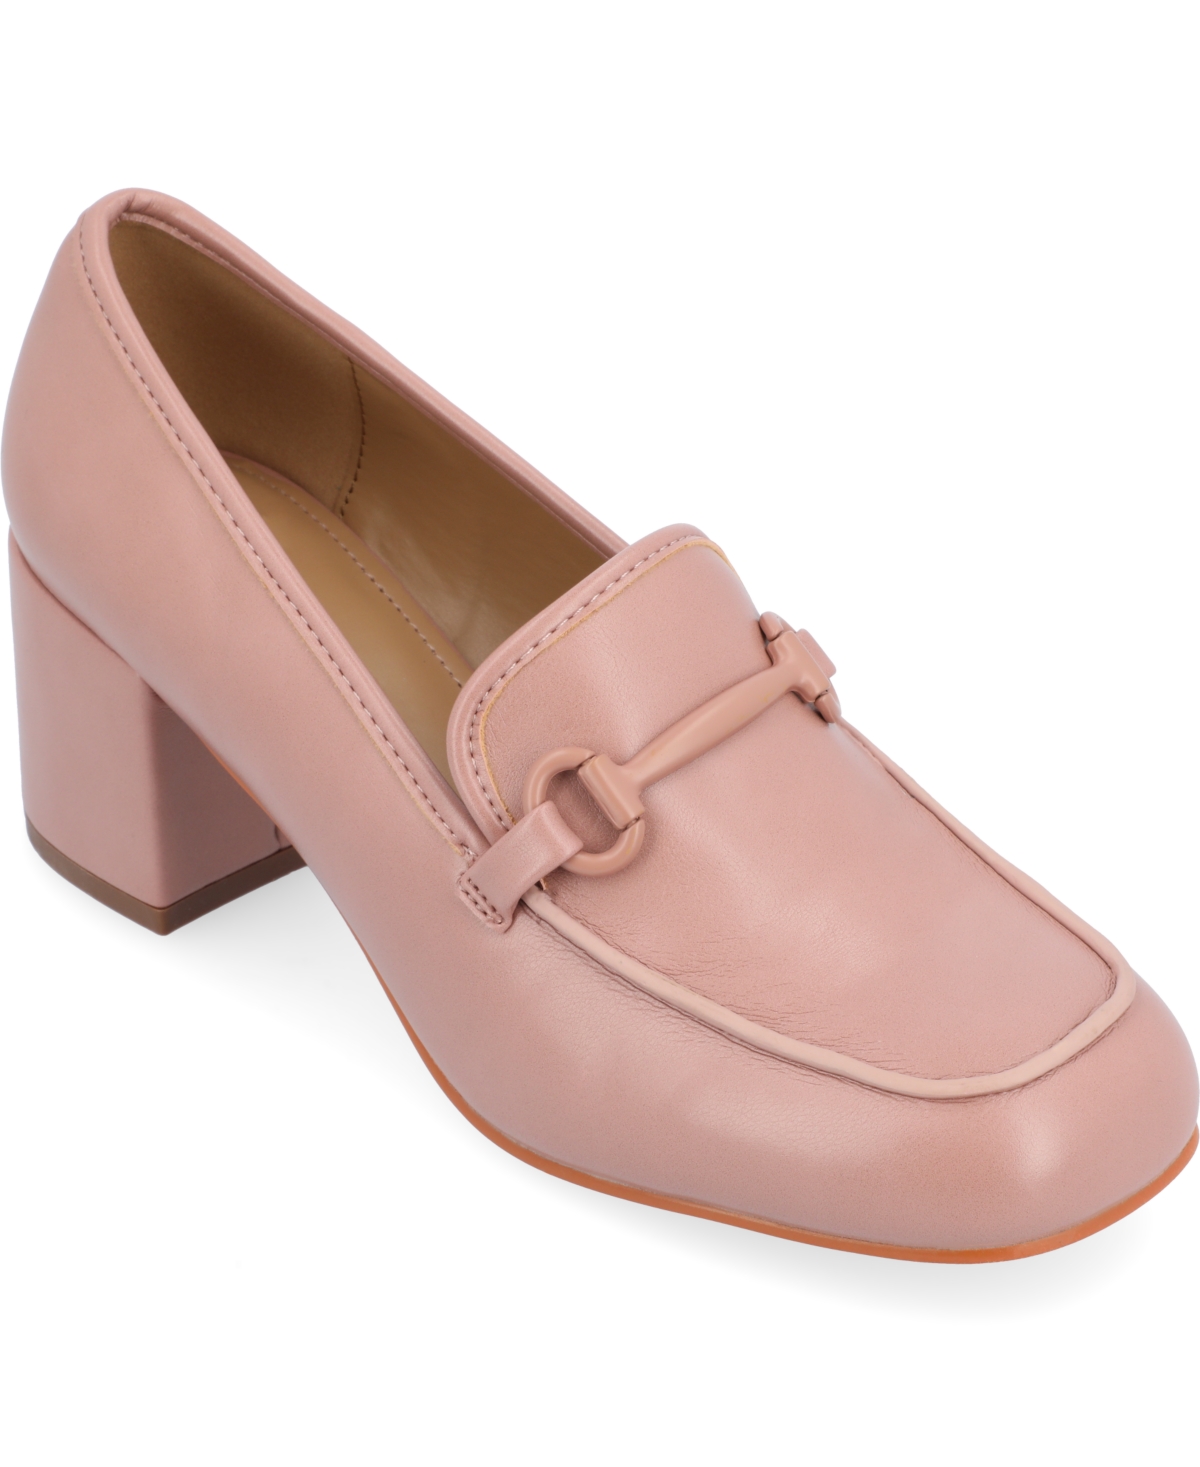 Journee Collection Nysaa Horsebit Loafer In Blush